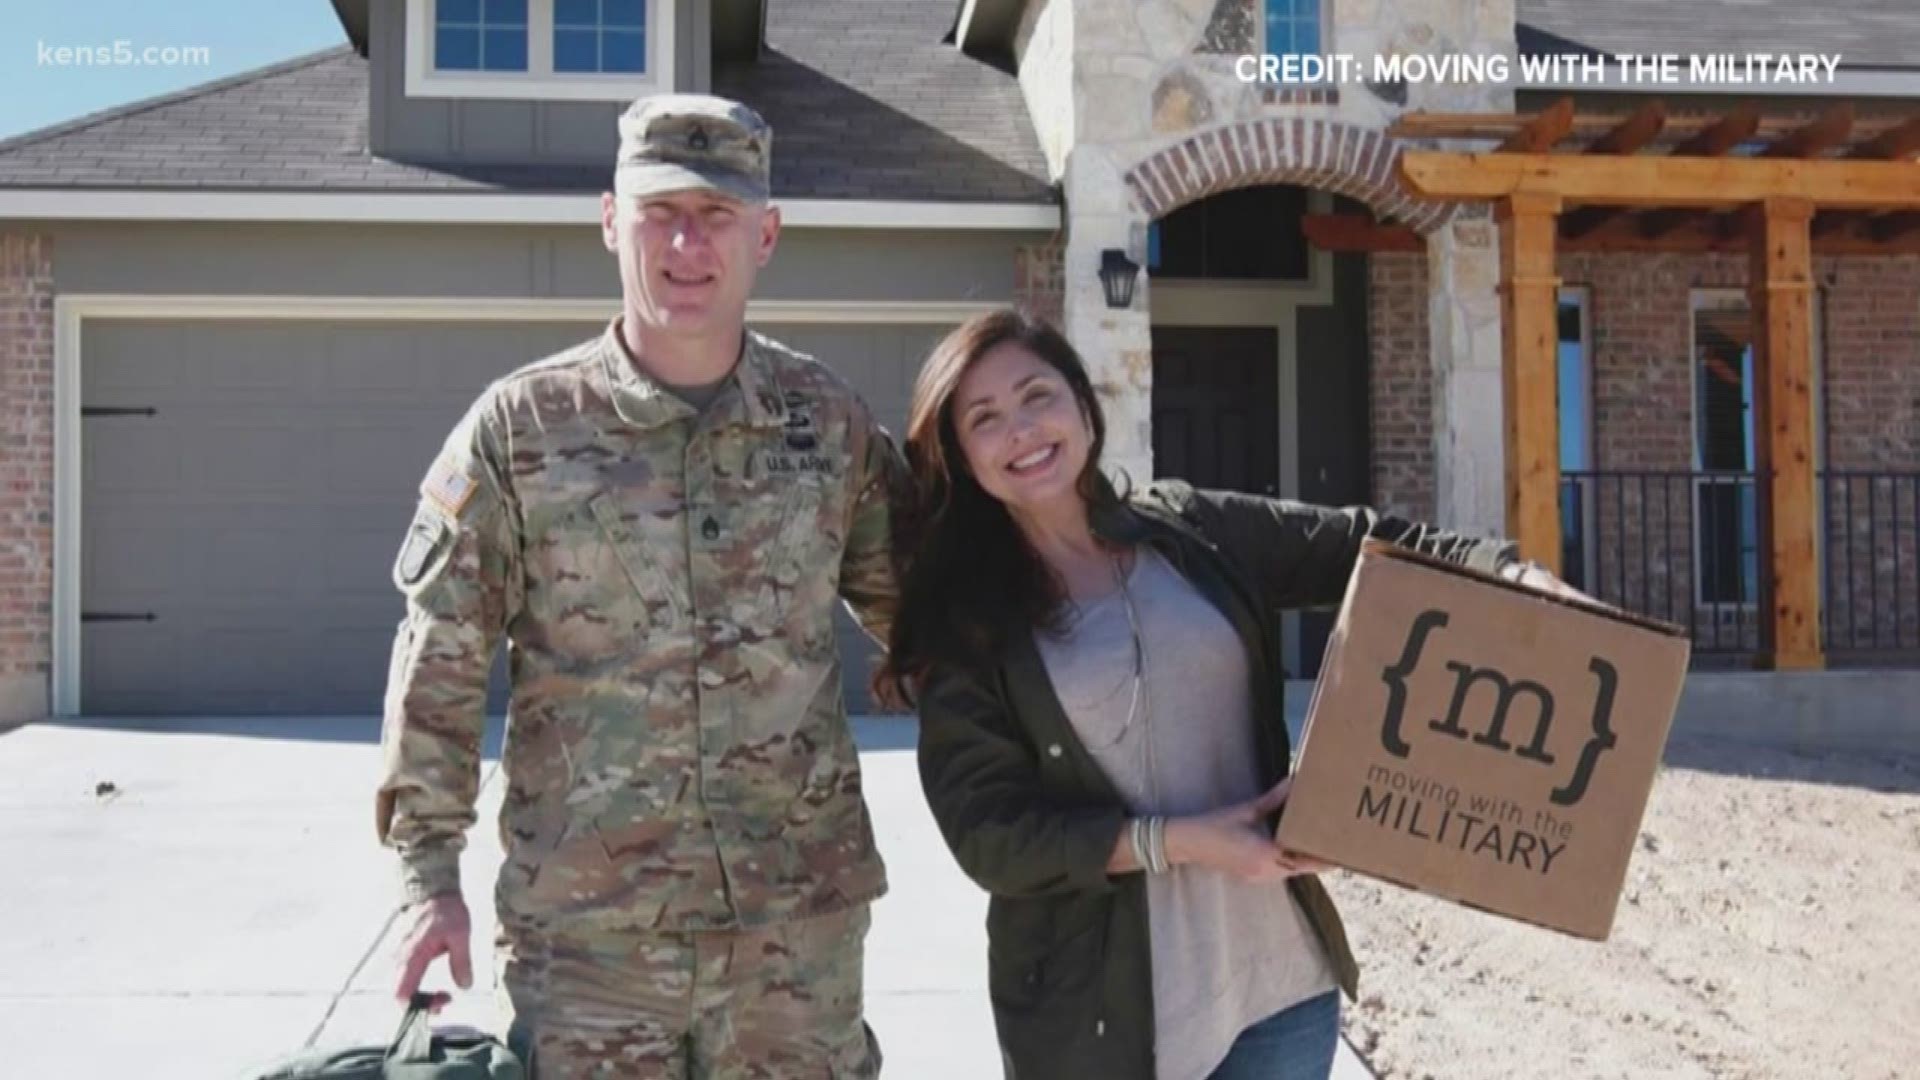 An army wife's passion project is helping military families across the country. Her web series is empowering and changing lives, one makeover at a time.